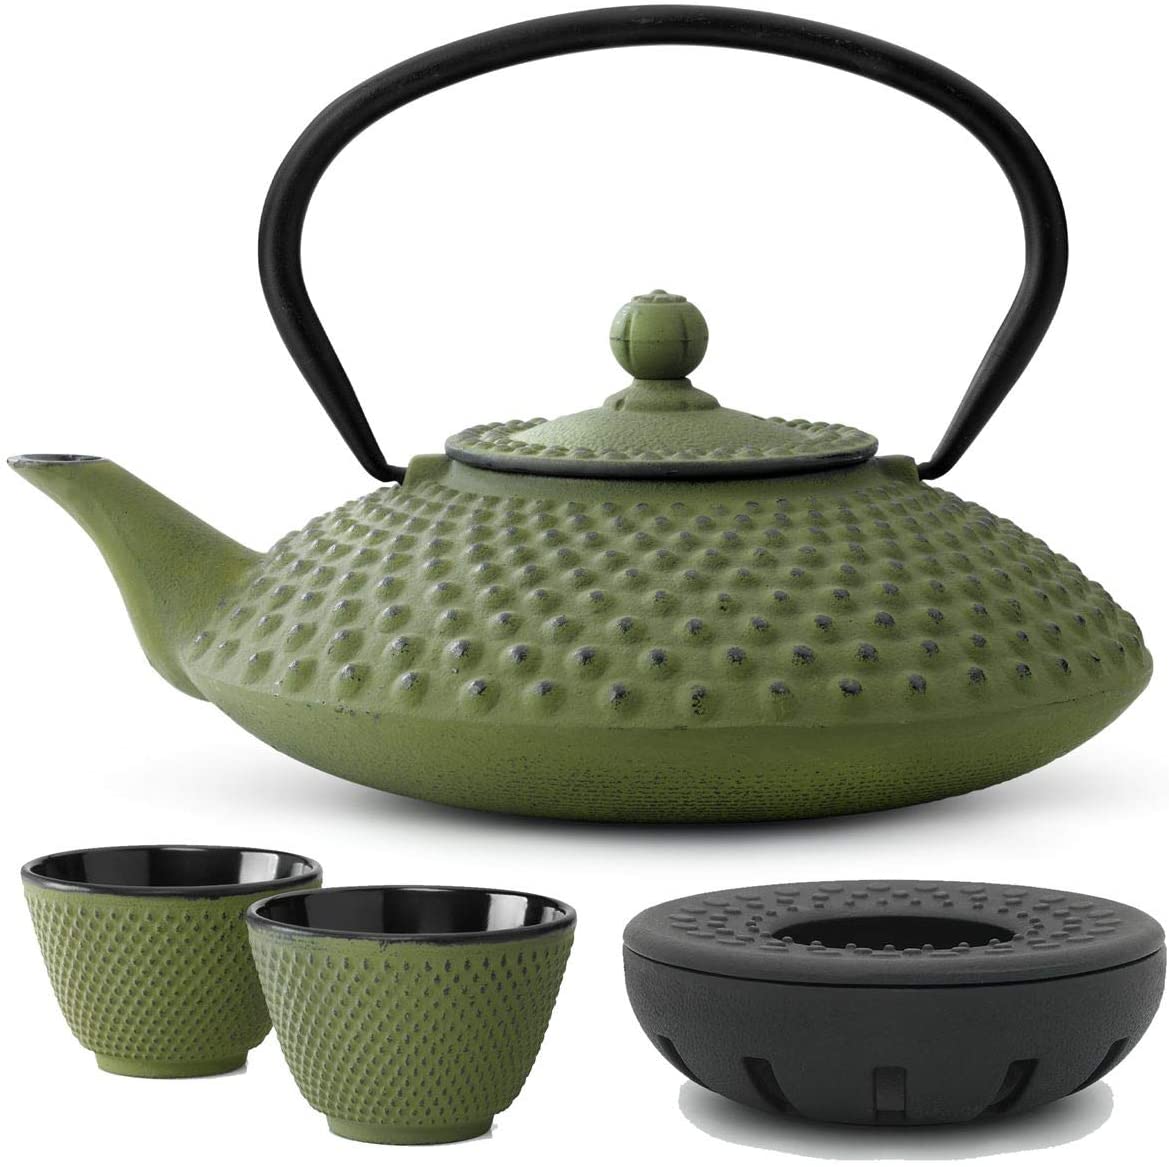 Asian Cast Iron Set Green 1.25 Litre Teapot with Tea Filter Strainer & Warmer with Tea Cup Bredemeijer Series Xilin